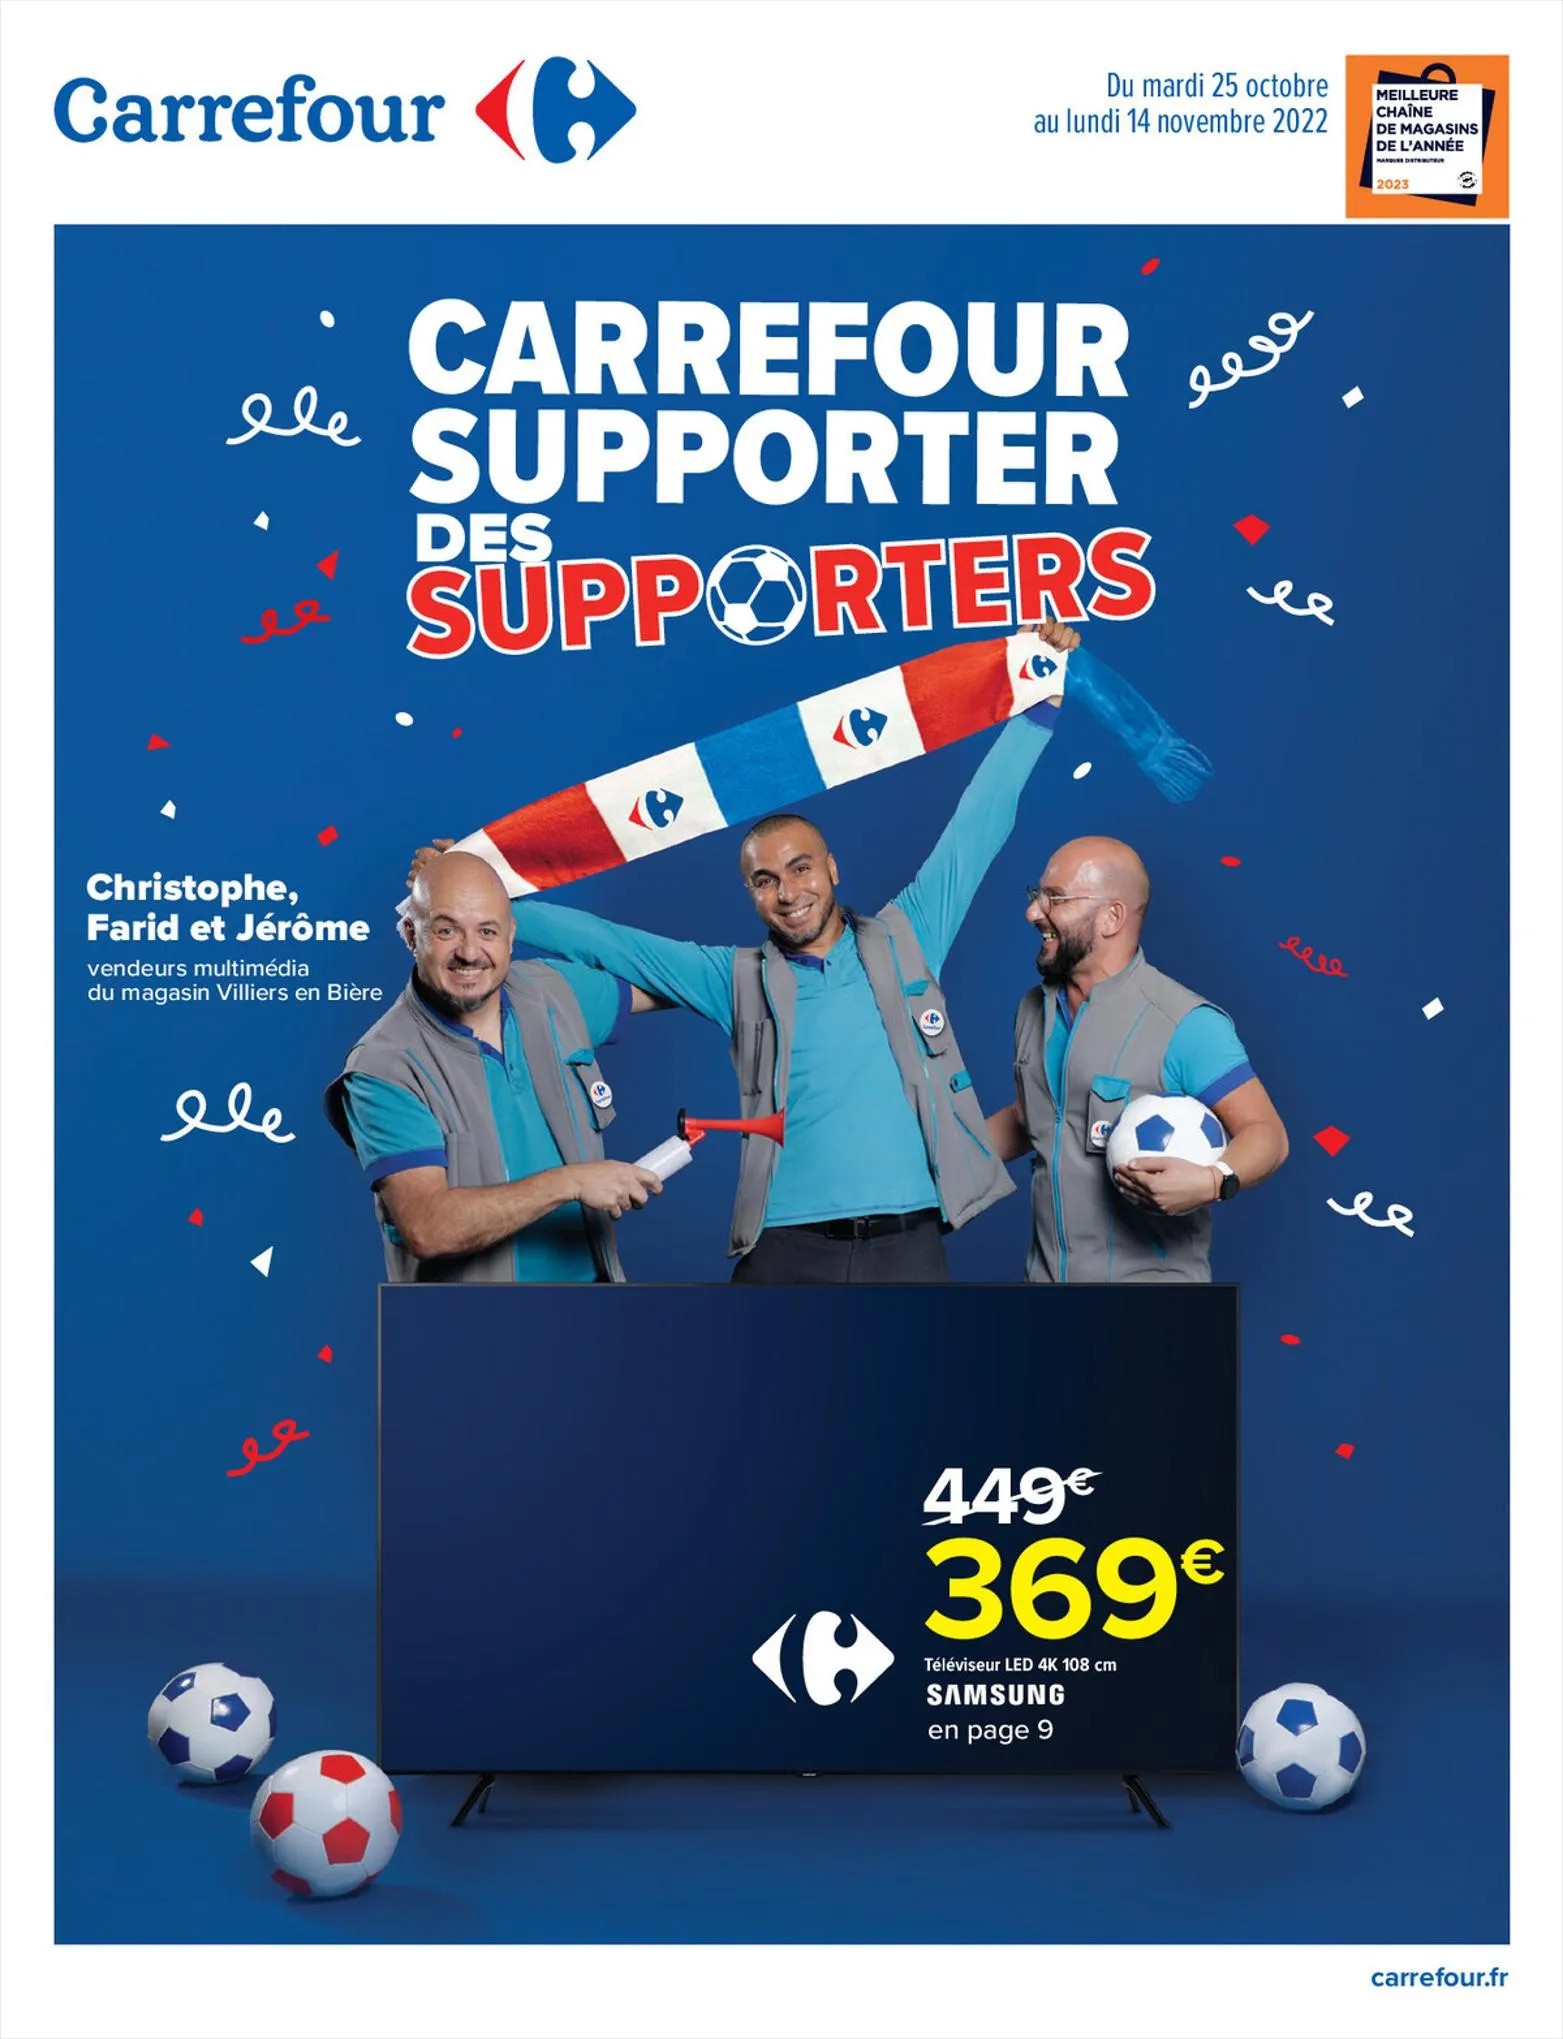 Catalogue Carrefour supporter des supporters, page 00001